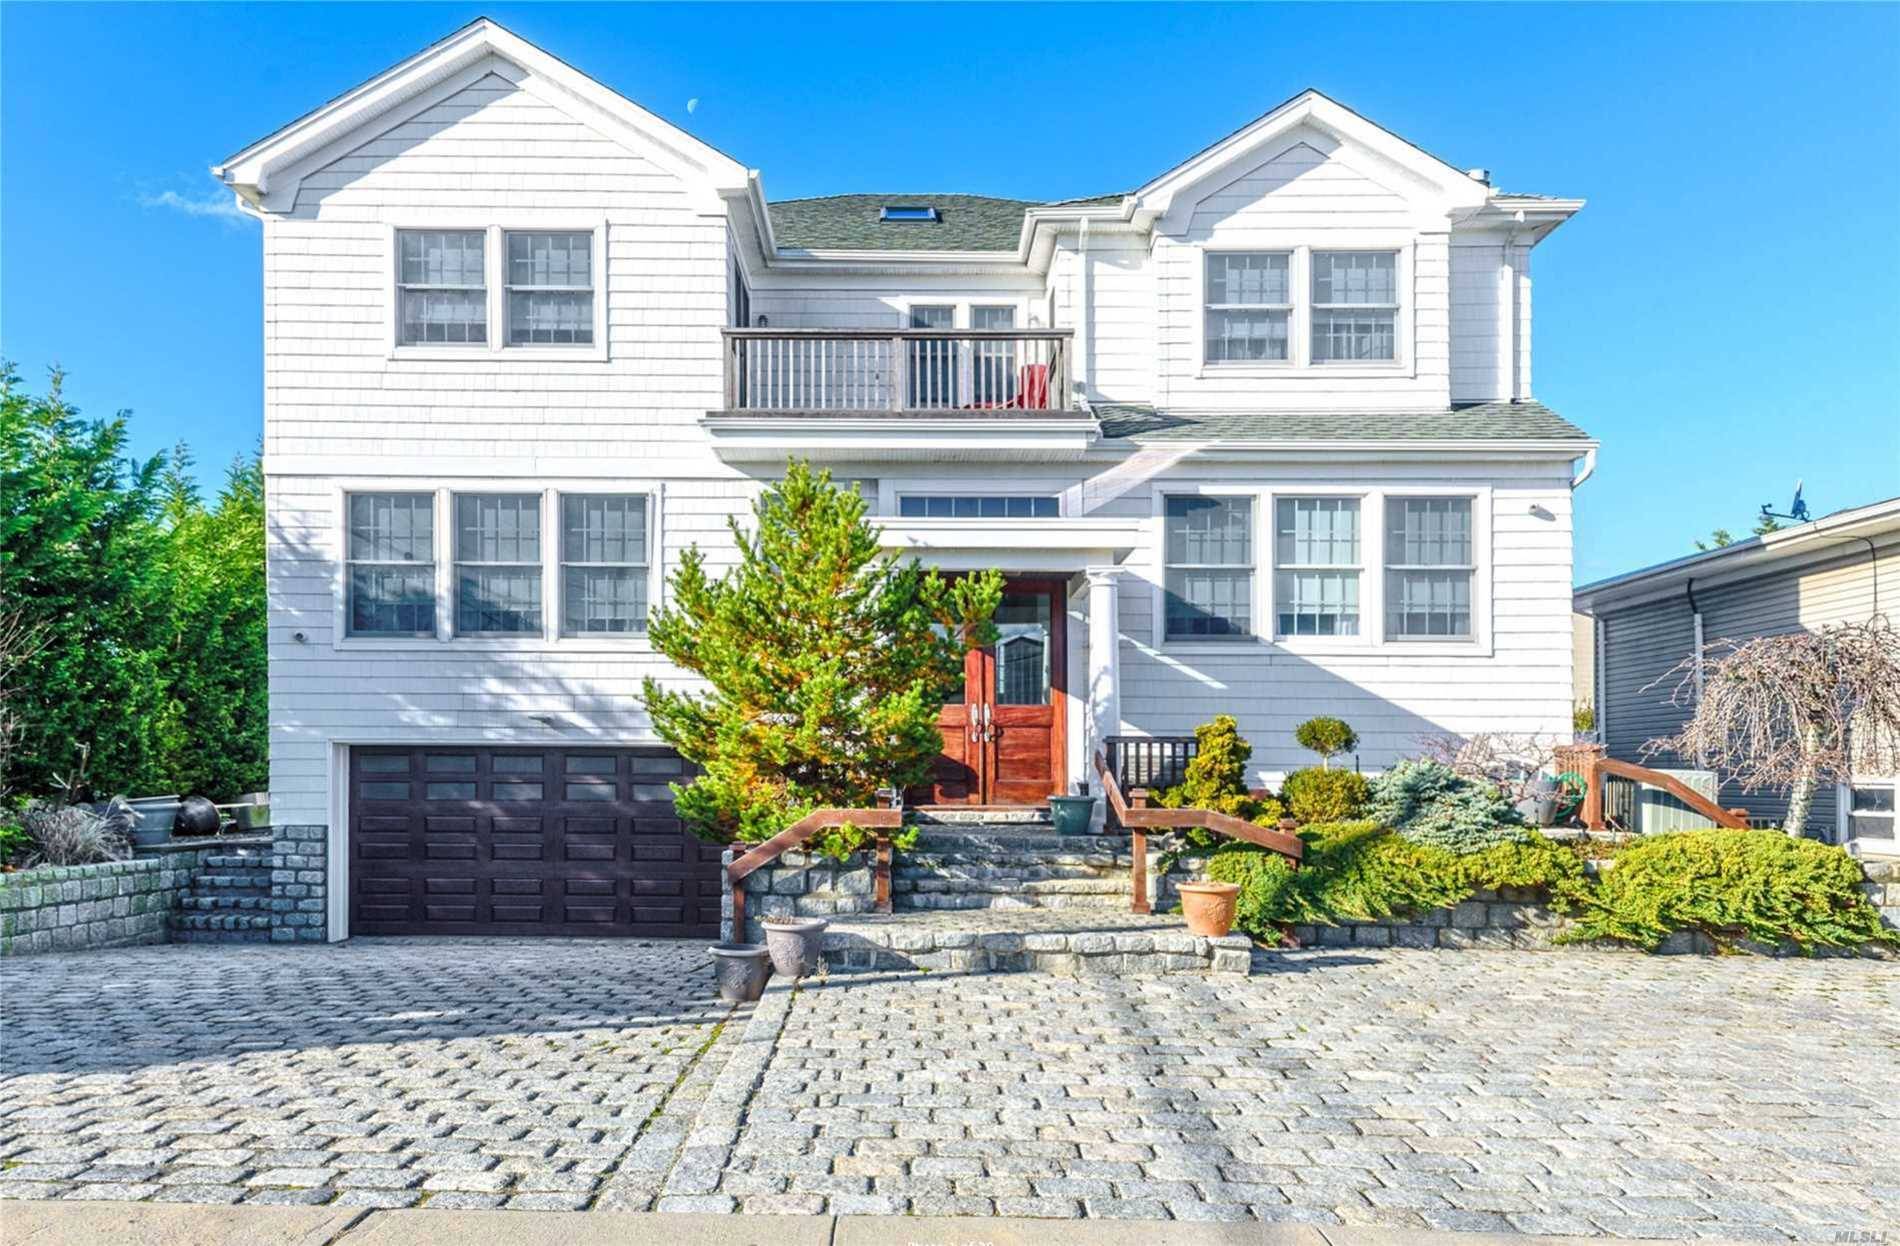 Gorgeous Custom Colonial With Bay Front Views And Dock.